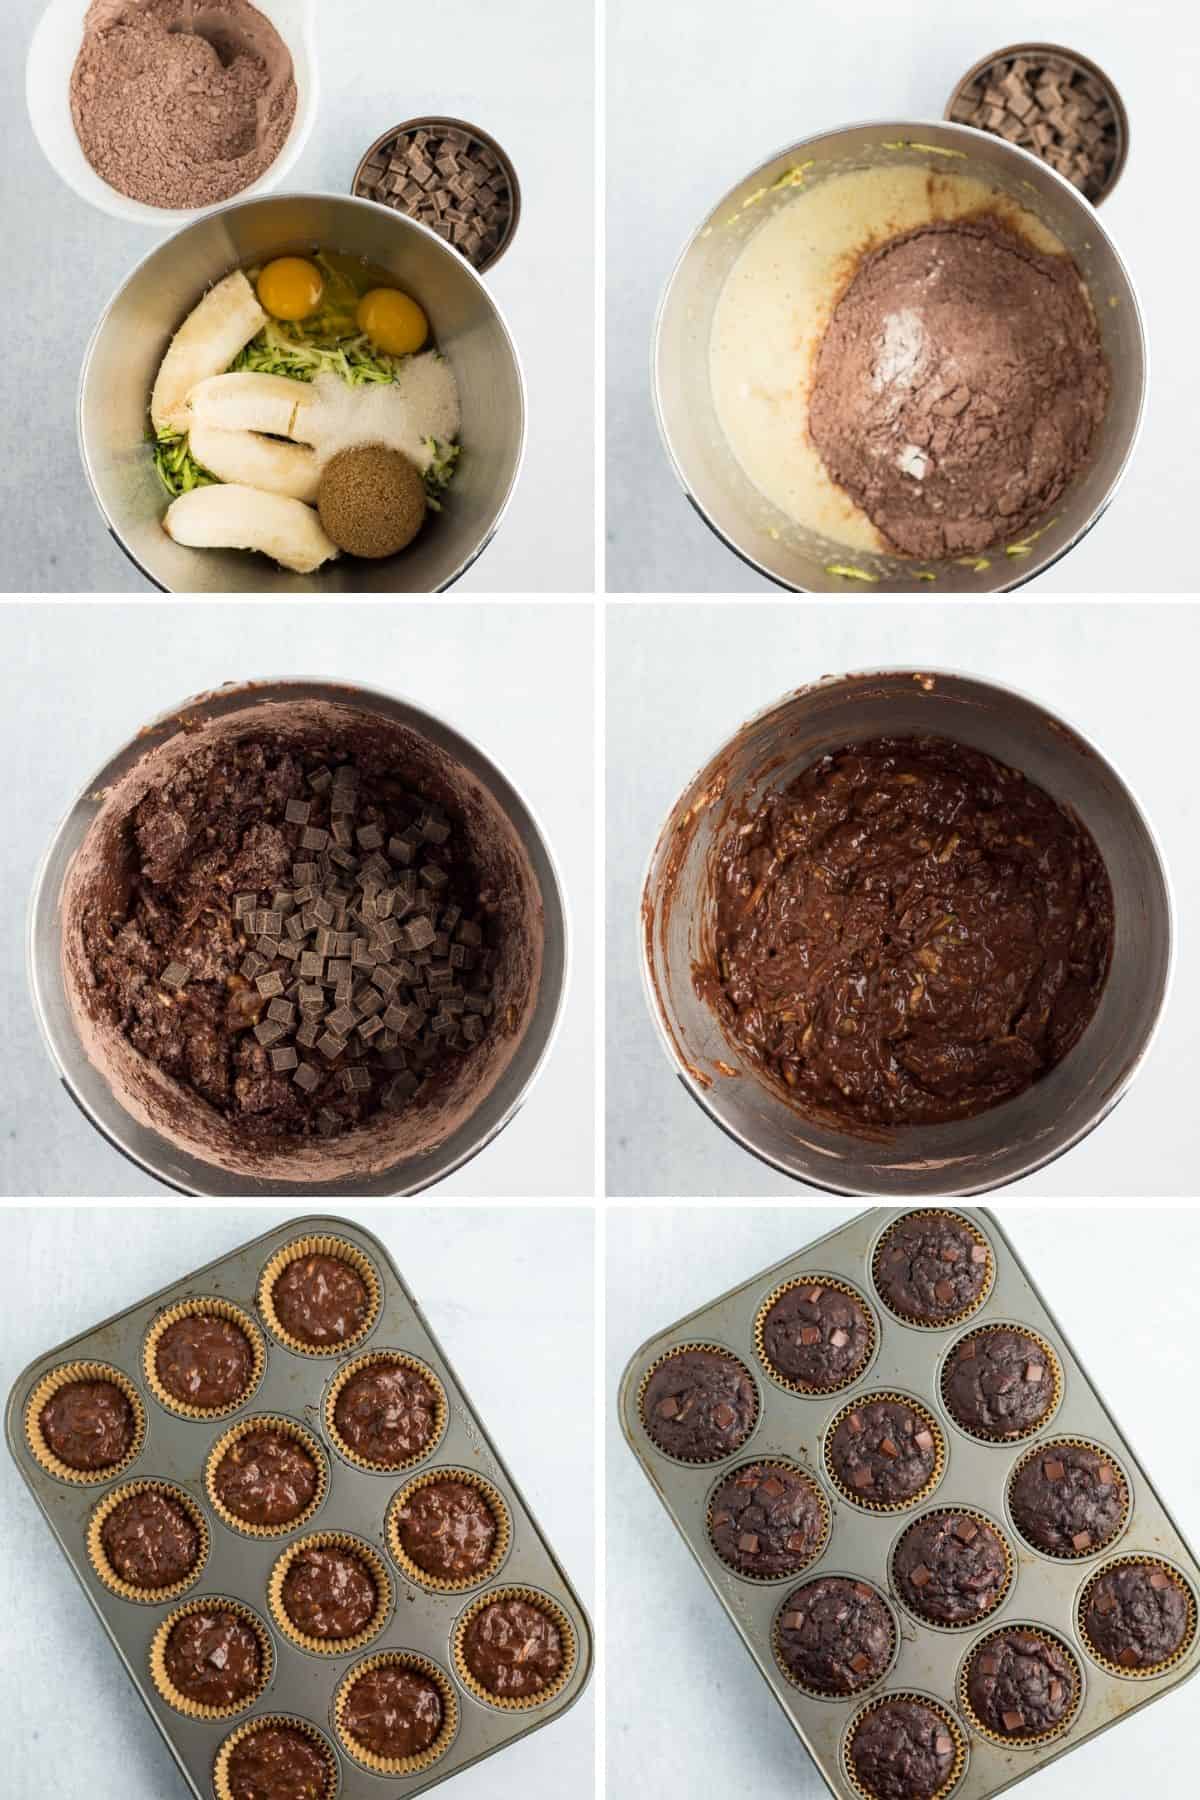 6 photos of showing step by step how to make chocolate chip zucchini muffins.